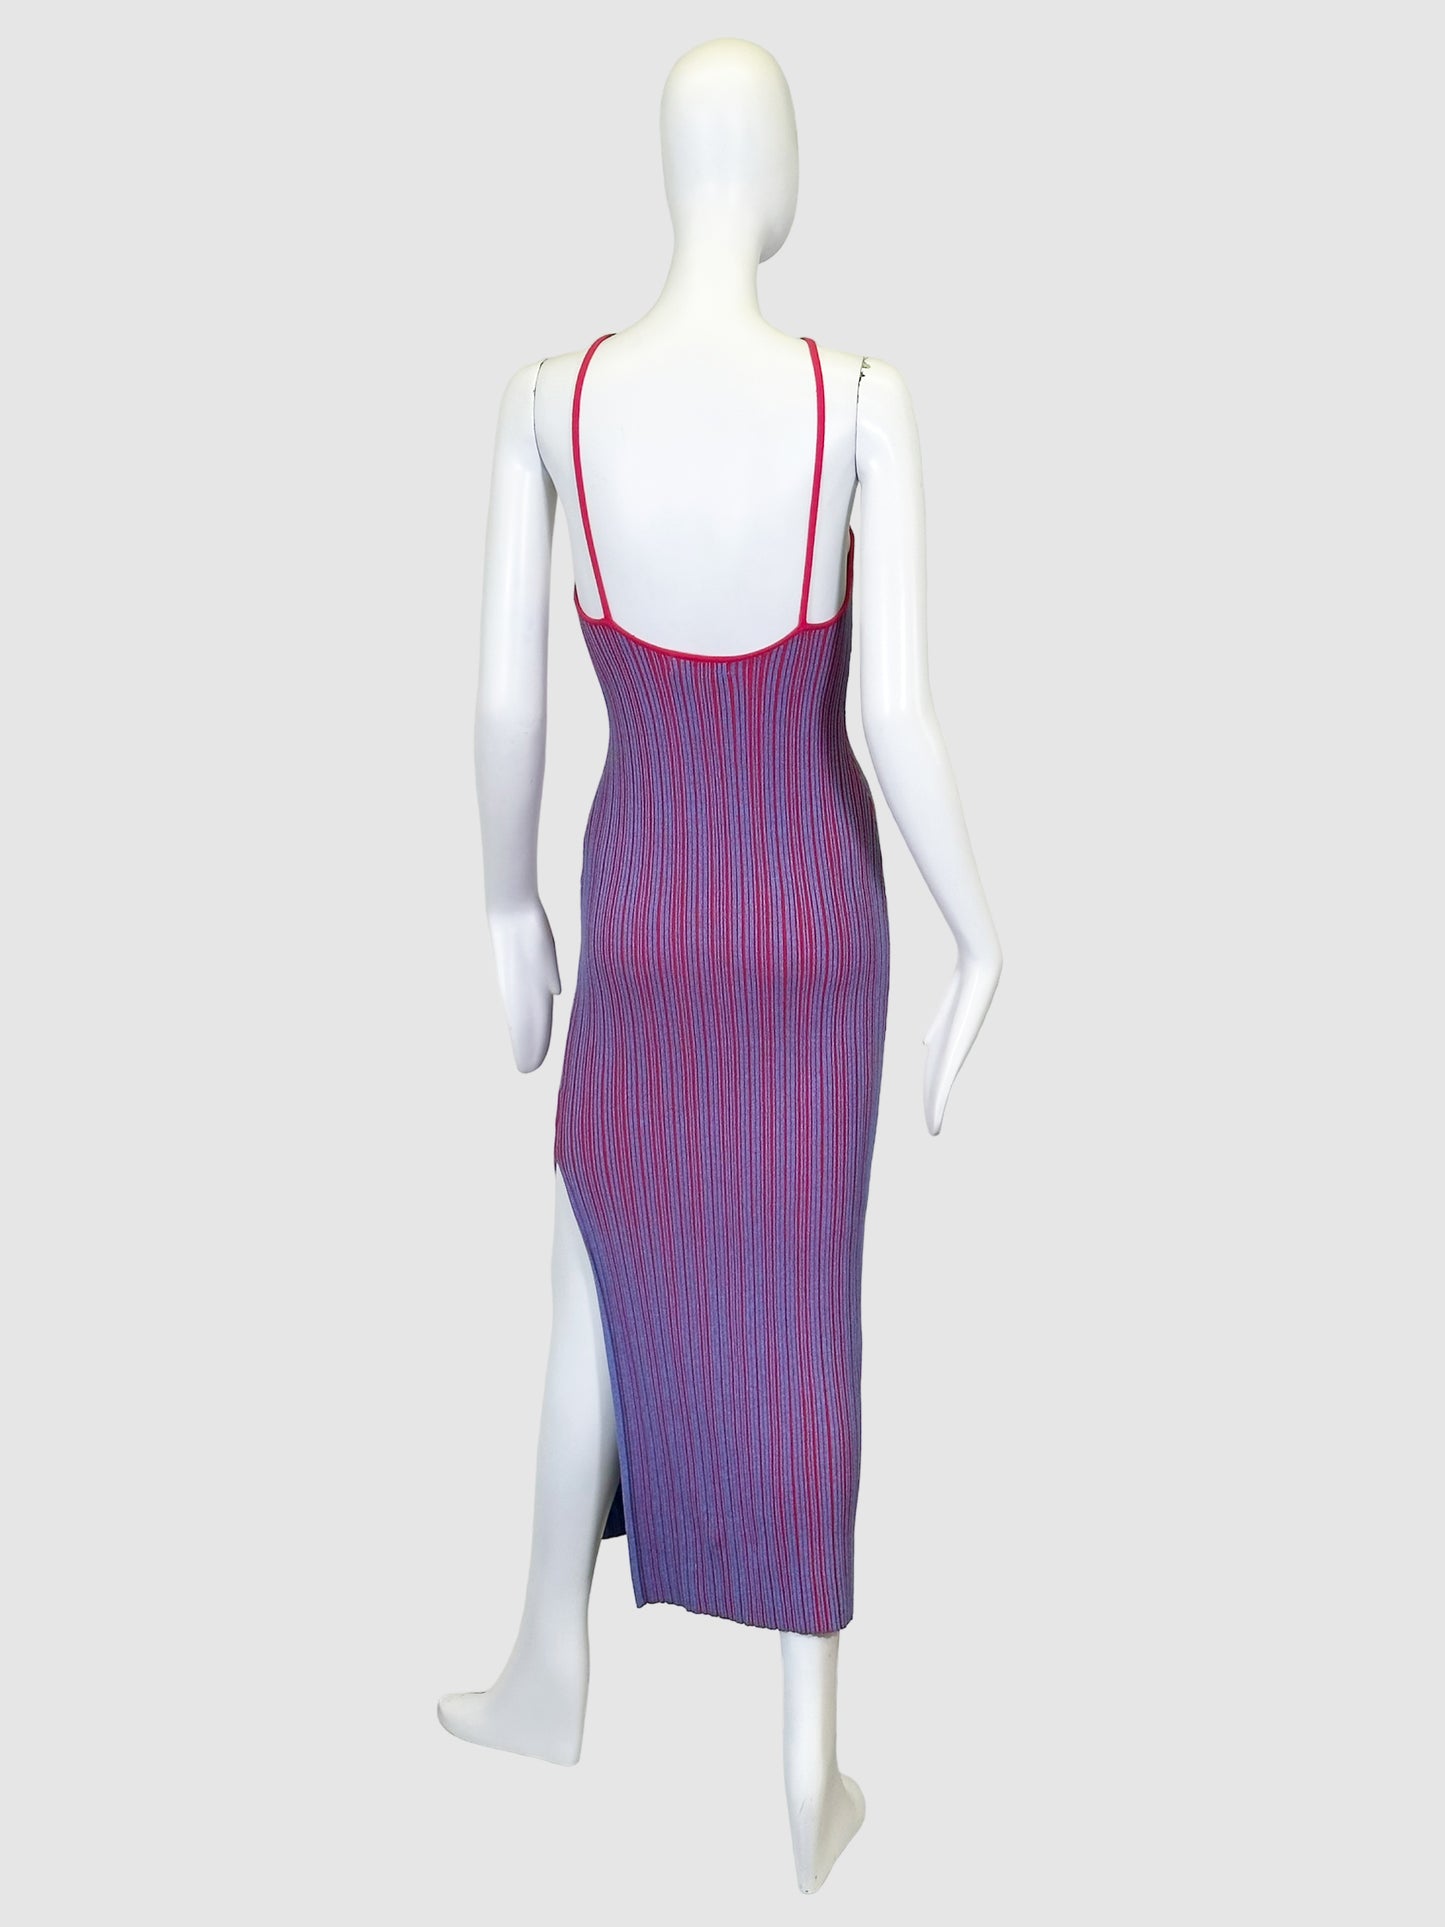 Anna Quan Strappy Ribbed Dress - Size 8